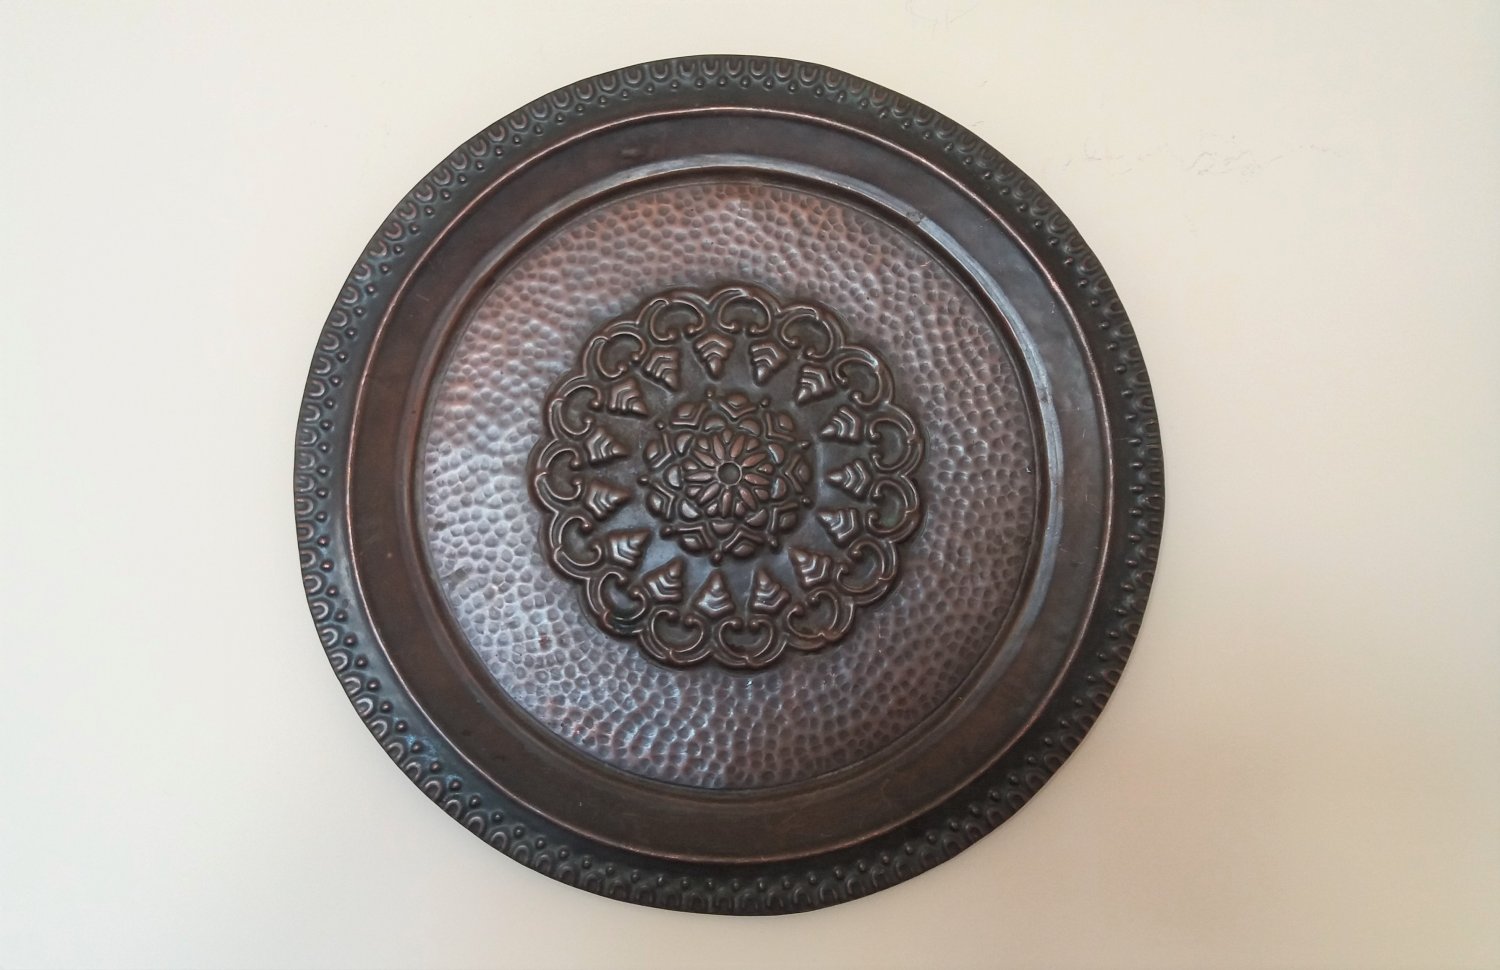 Vintage Embossed Copper Tray Wall Decoration, Home Wall DÃ©cor, Wall Hanging Plate, Tray Wall Decor